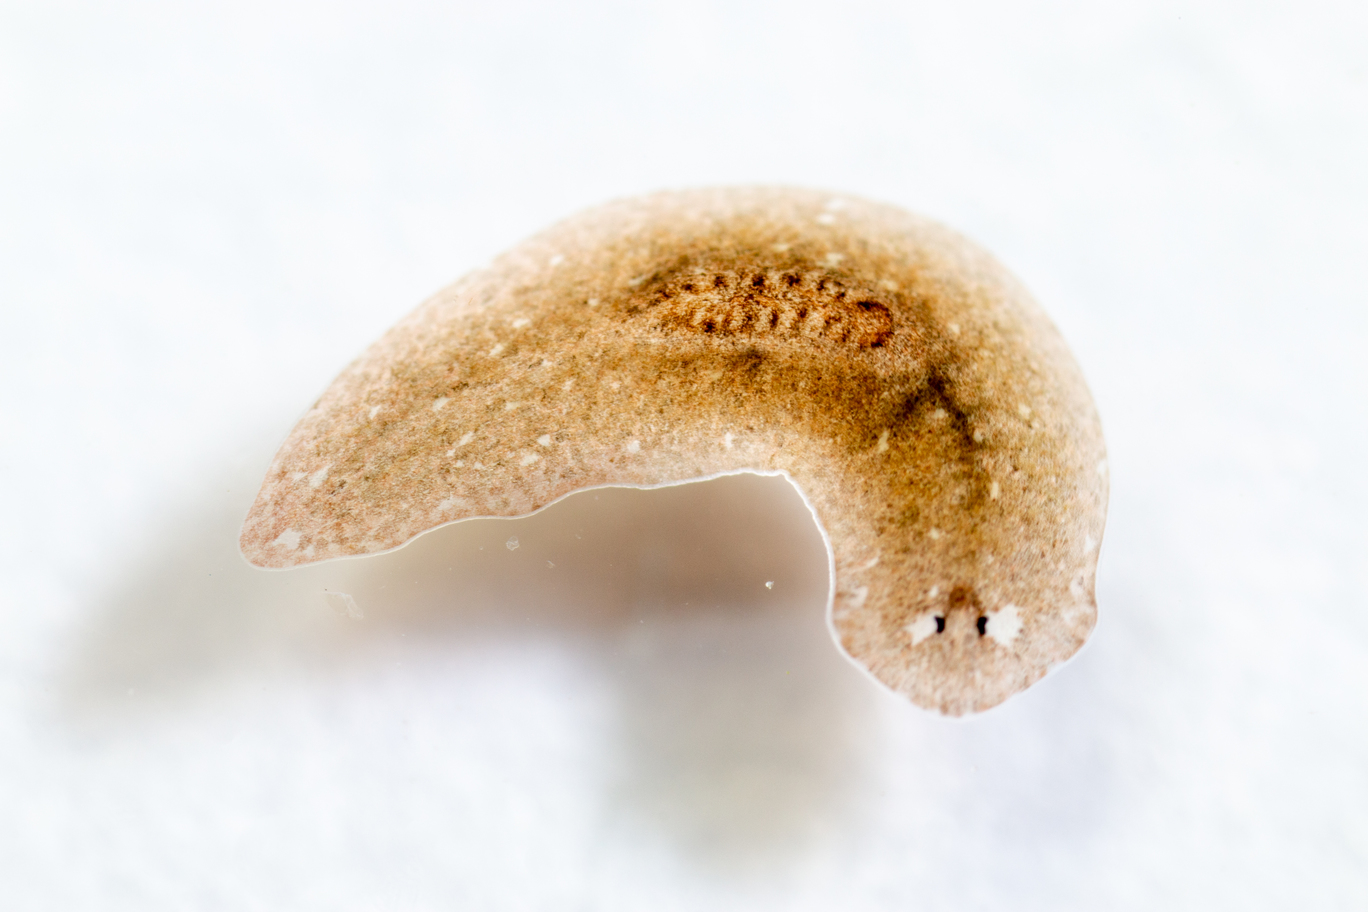 A tan and brown planarian worm on a white background.